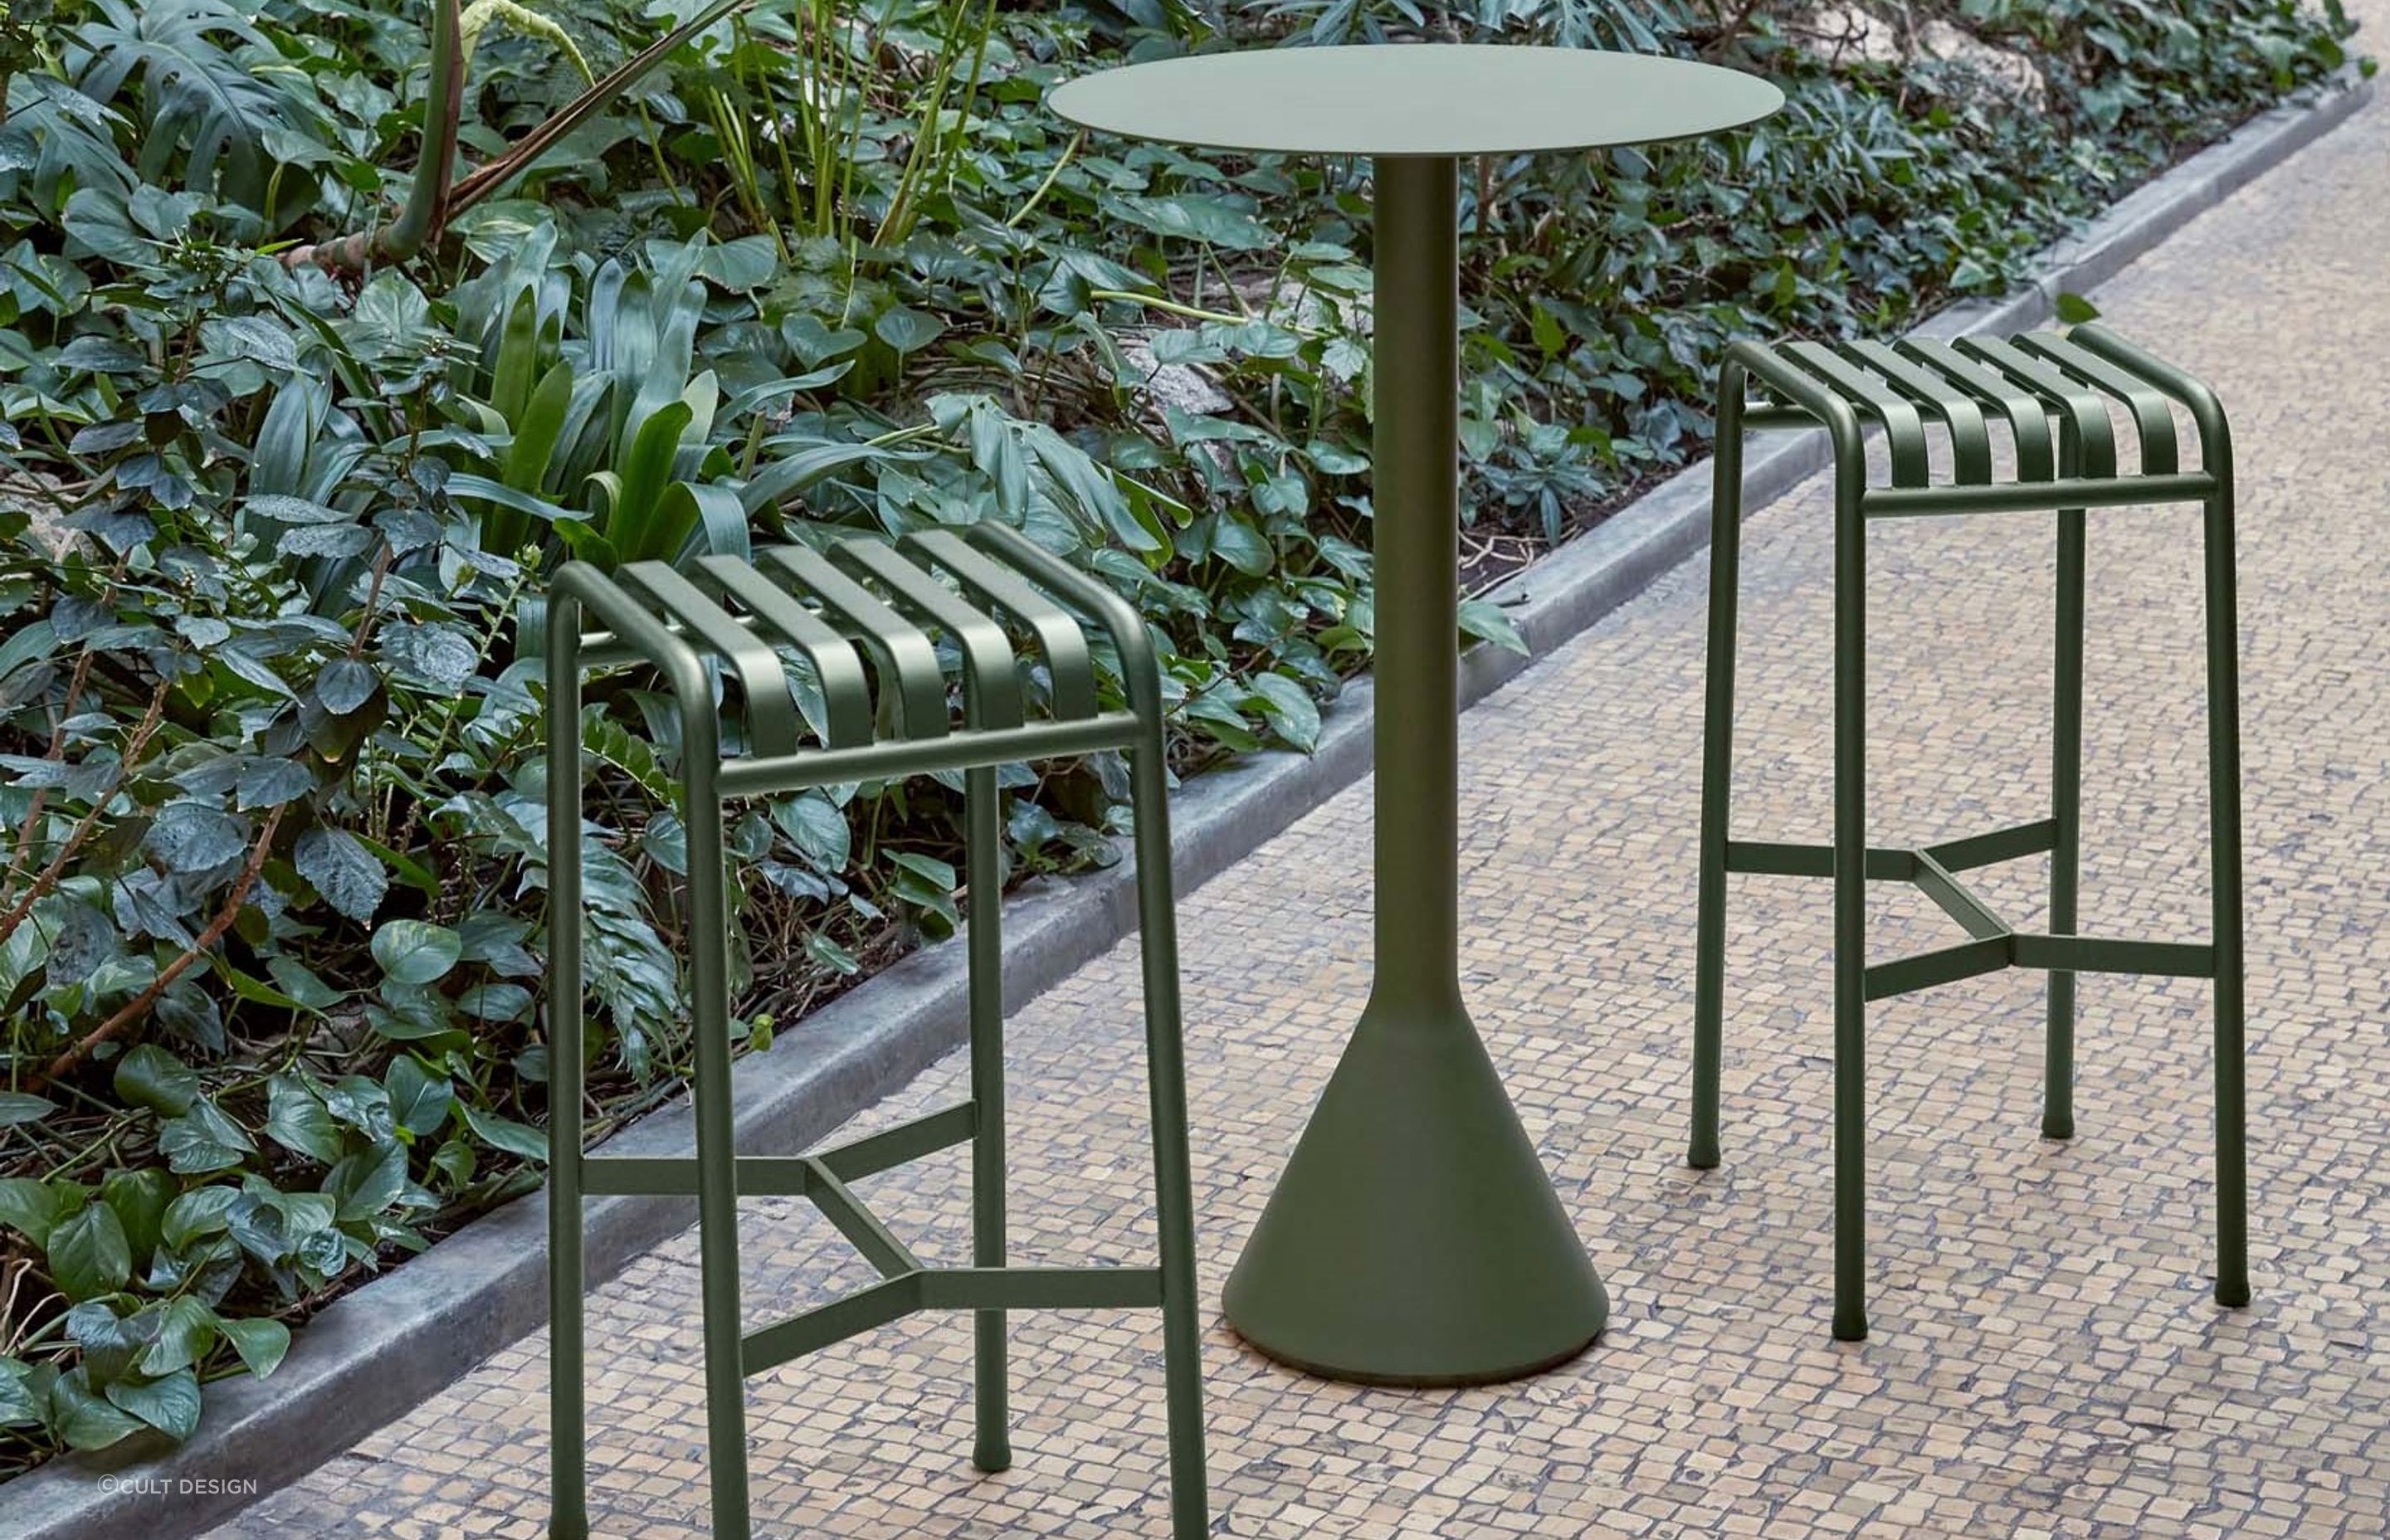 The Palissade Barstool, designed by Ronan and Erwan Bouroullec is incredibly versatile, widely used in a variety of outdoor settings.